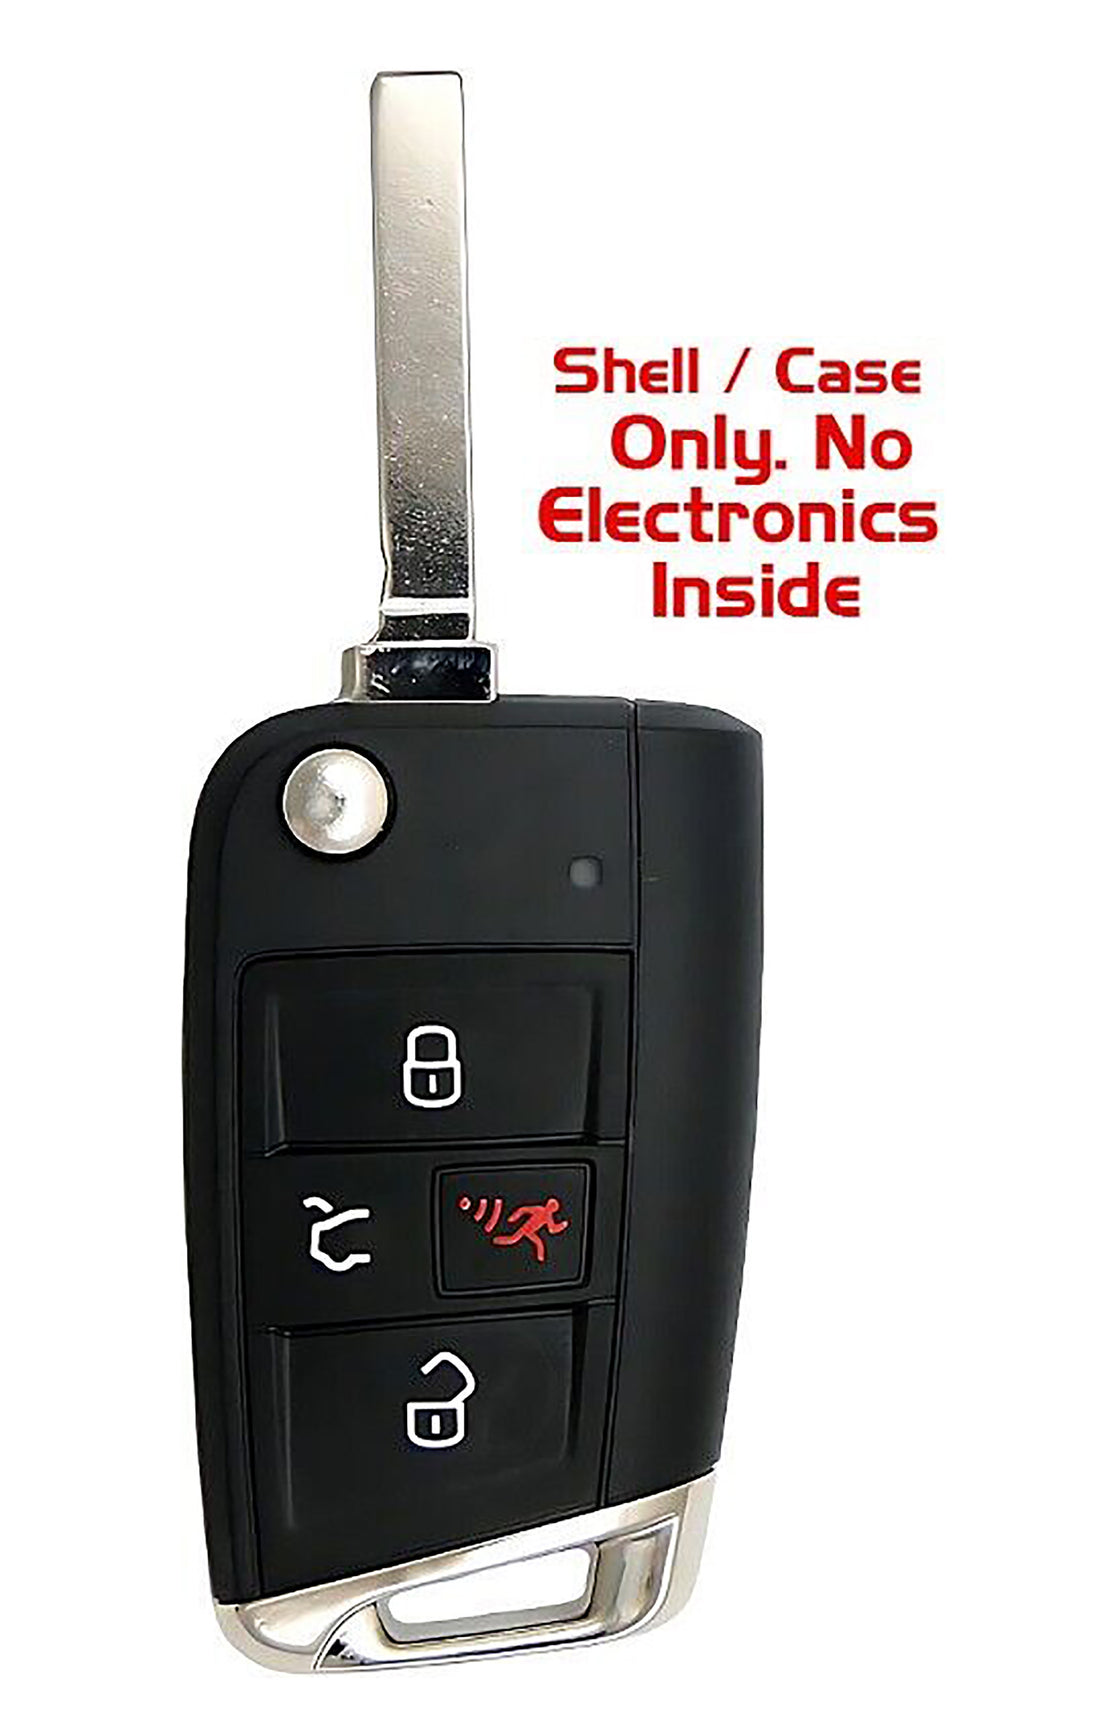 1x New Replacement Key Fob Remote SHELL / CASE Compatible with & Fit For Volkswagen Vehicles - MPN NBGFS125C5-02 (NO electronics or Chip inside)